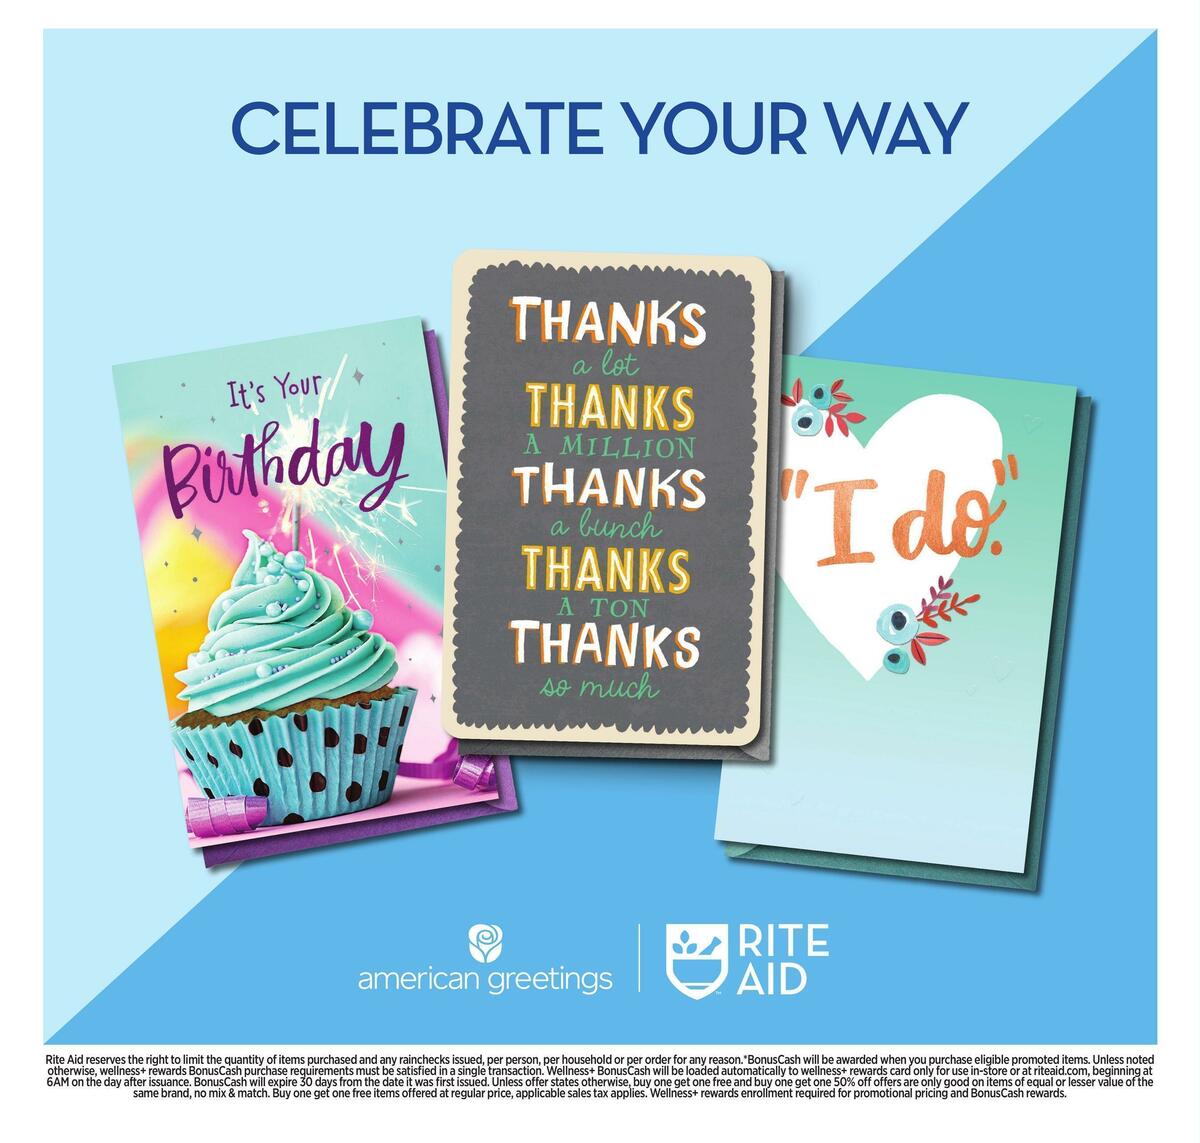 Rite Aid Weekly Ad from July 4